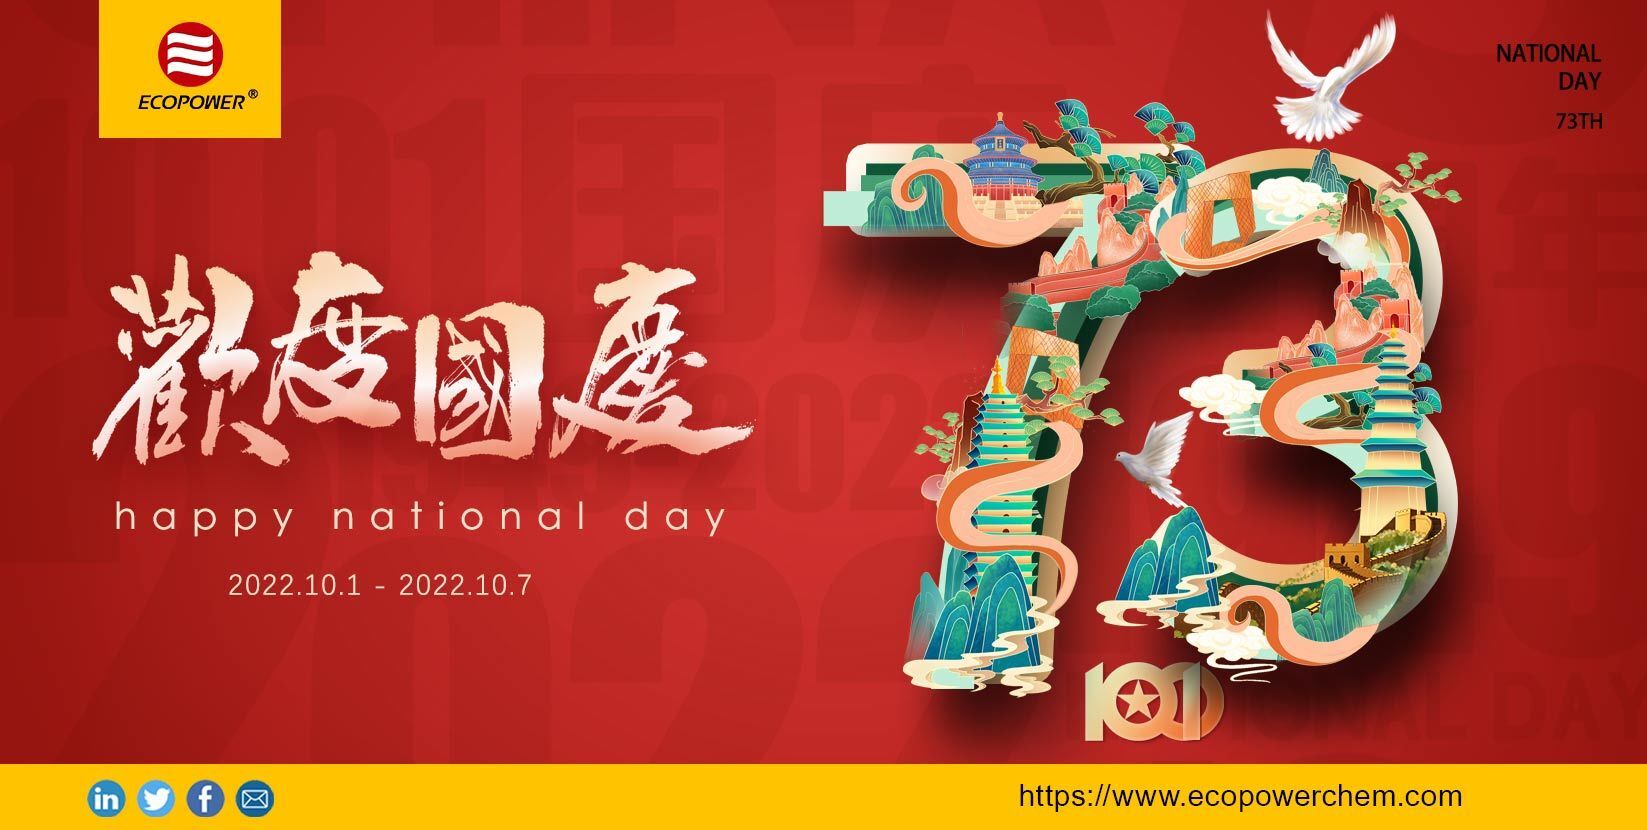  ECOPOWER National Day holiday